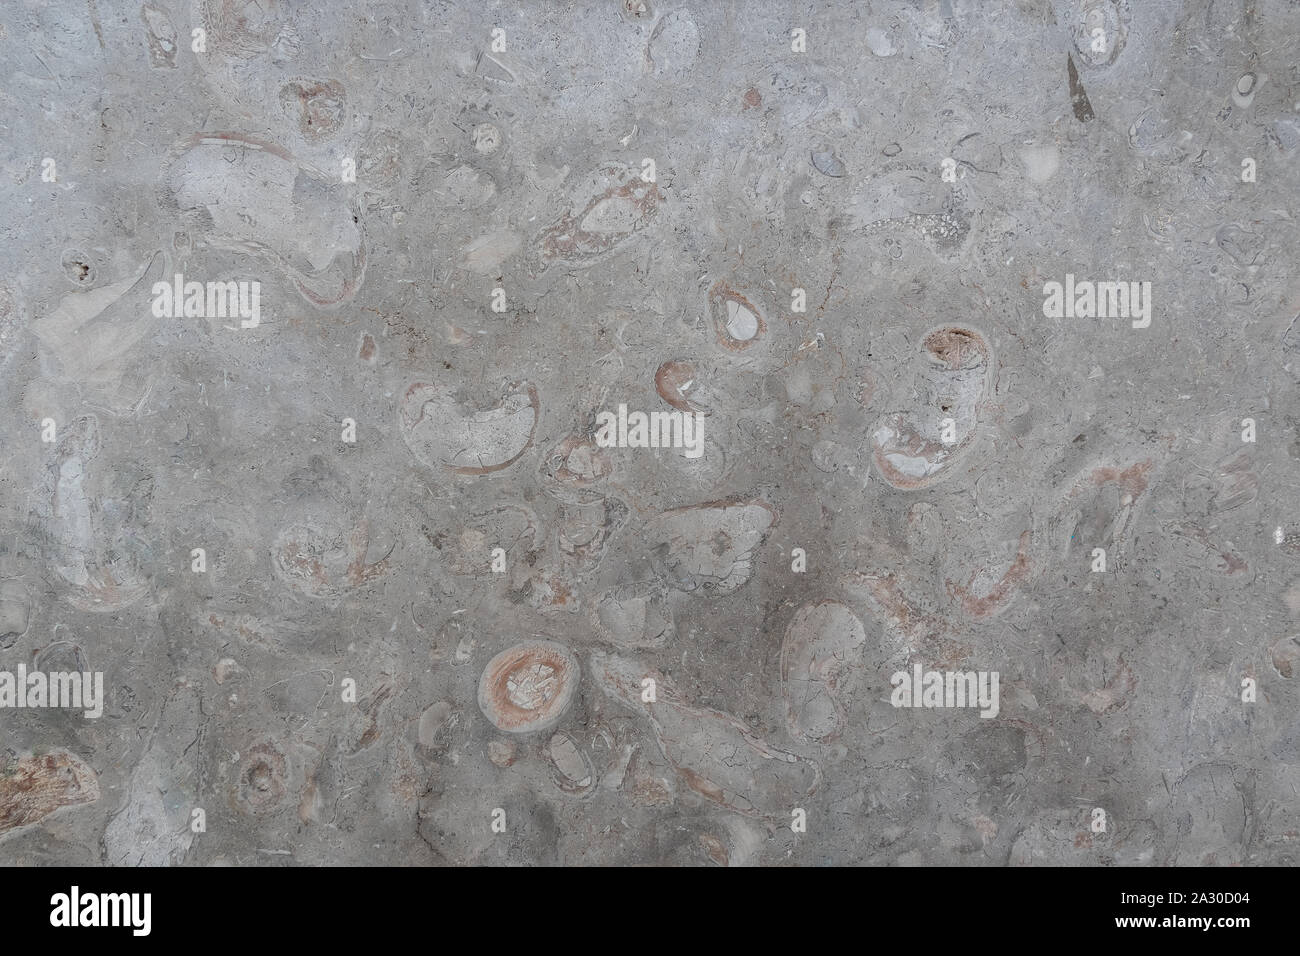 Smooth stone texture is gray-beige with cracks, spots. Stock Photo